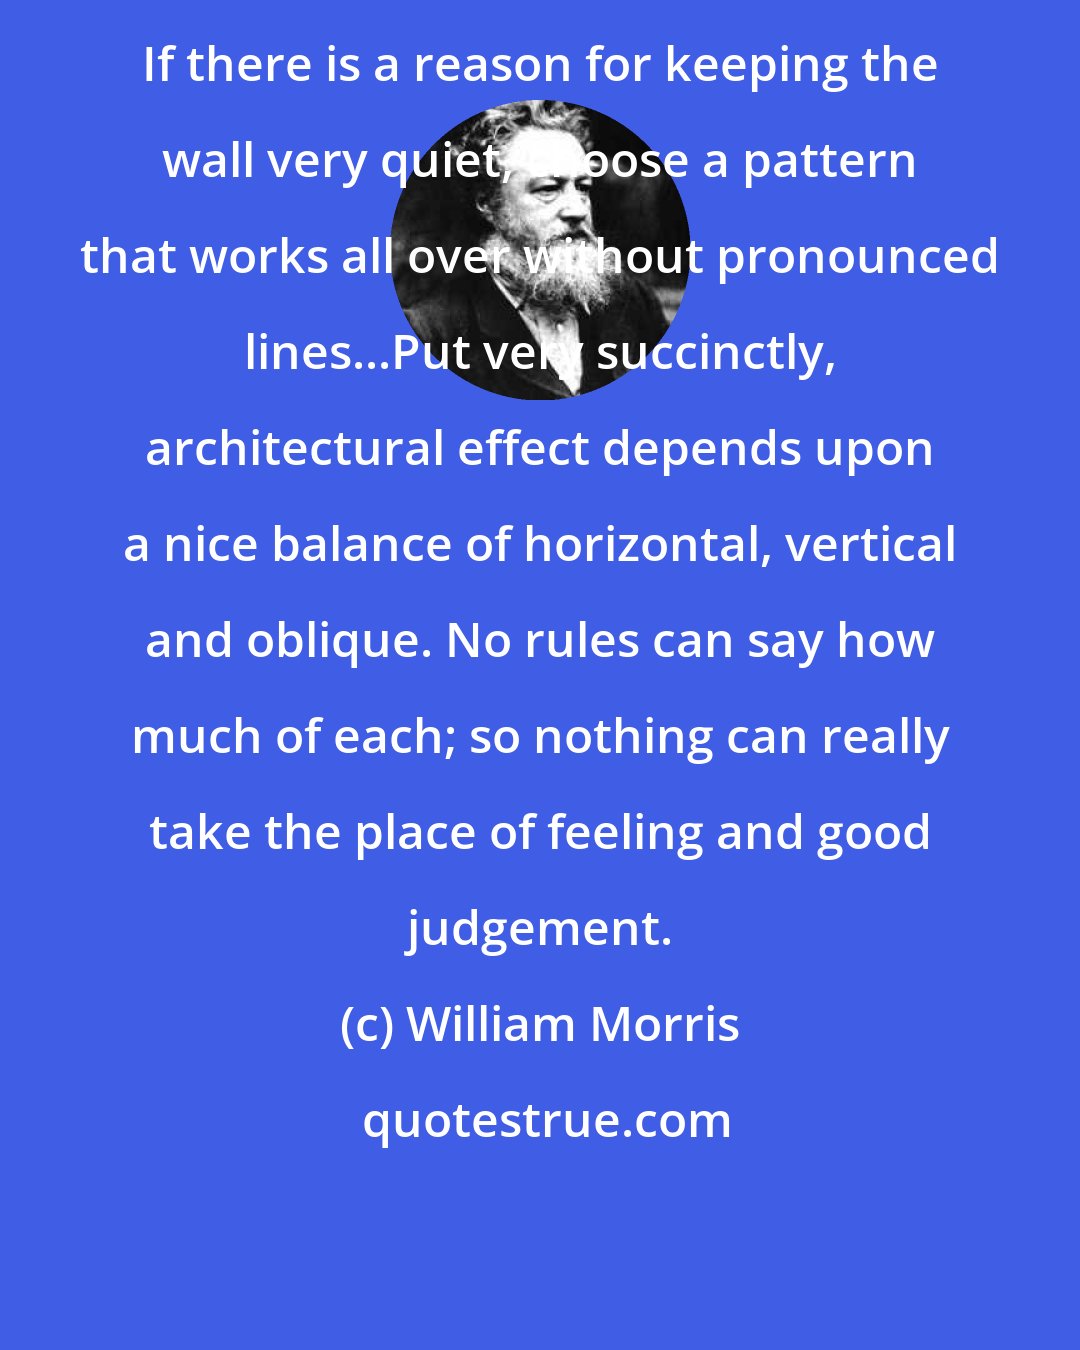 William Morris: If there is a reason for keeping the wall very quiet, choose a pattern that works all over without pronounced lines...Put very succinctly, architectural effect depends upon a nice balance of horizontal, vertical and oblique. No rules can say how much of each; so nothing can really take the place of feeling and good judgement.